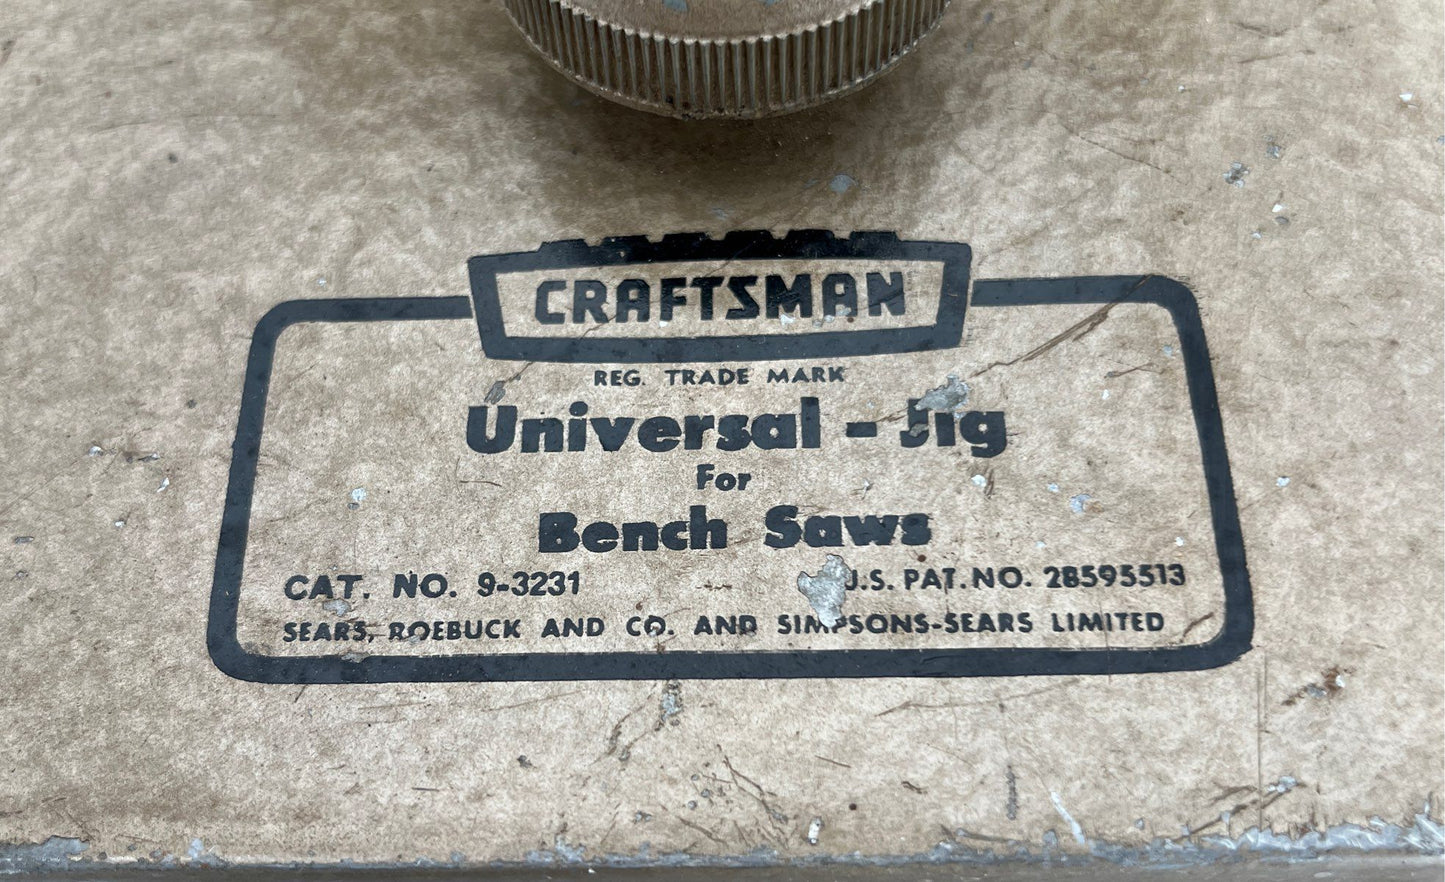 Vintage Sears, Roebuck & Co. Craftsman Universal-Jig For Bench Saws No. 9 3231